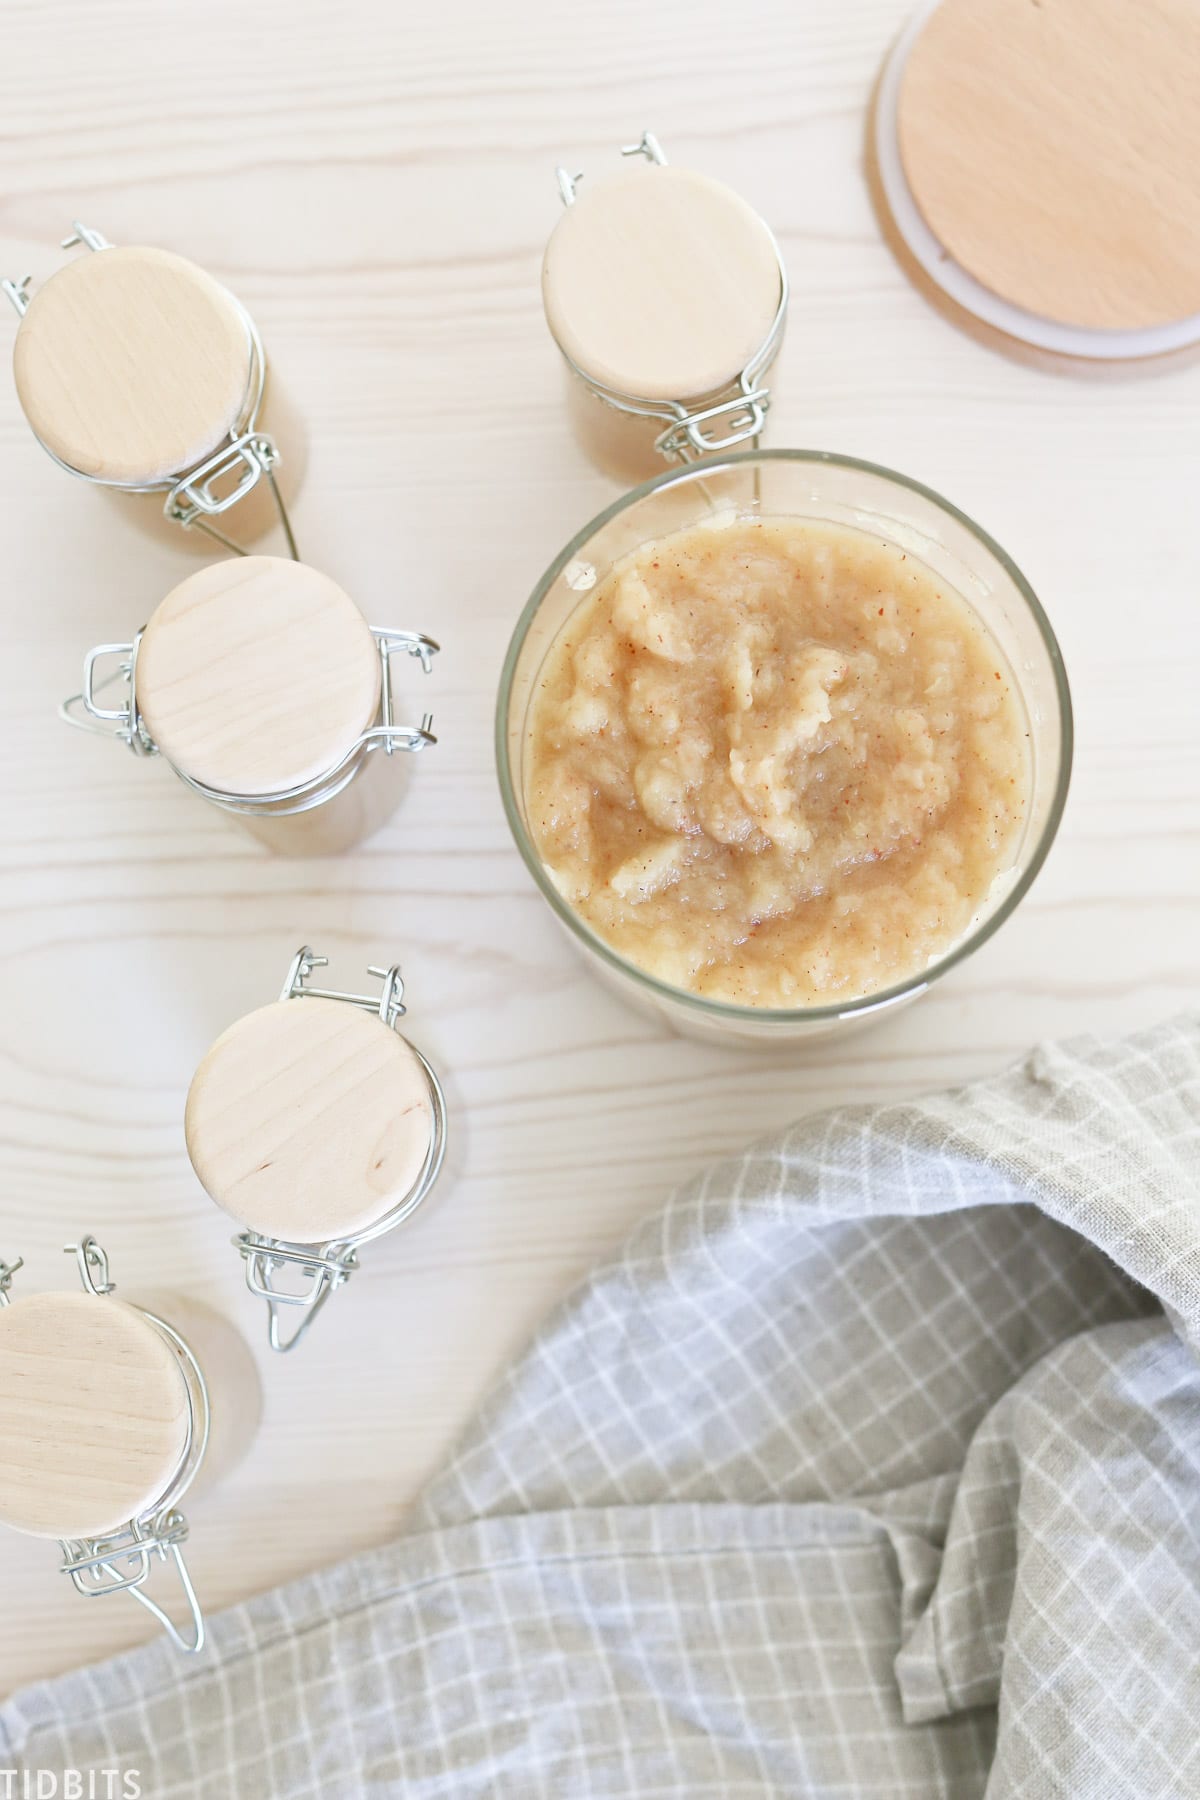 Flavorful, no sugar added stovetop applesauce recipe and instructions.